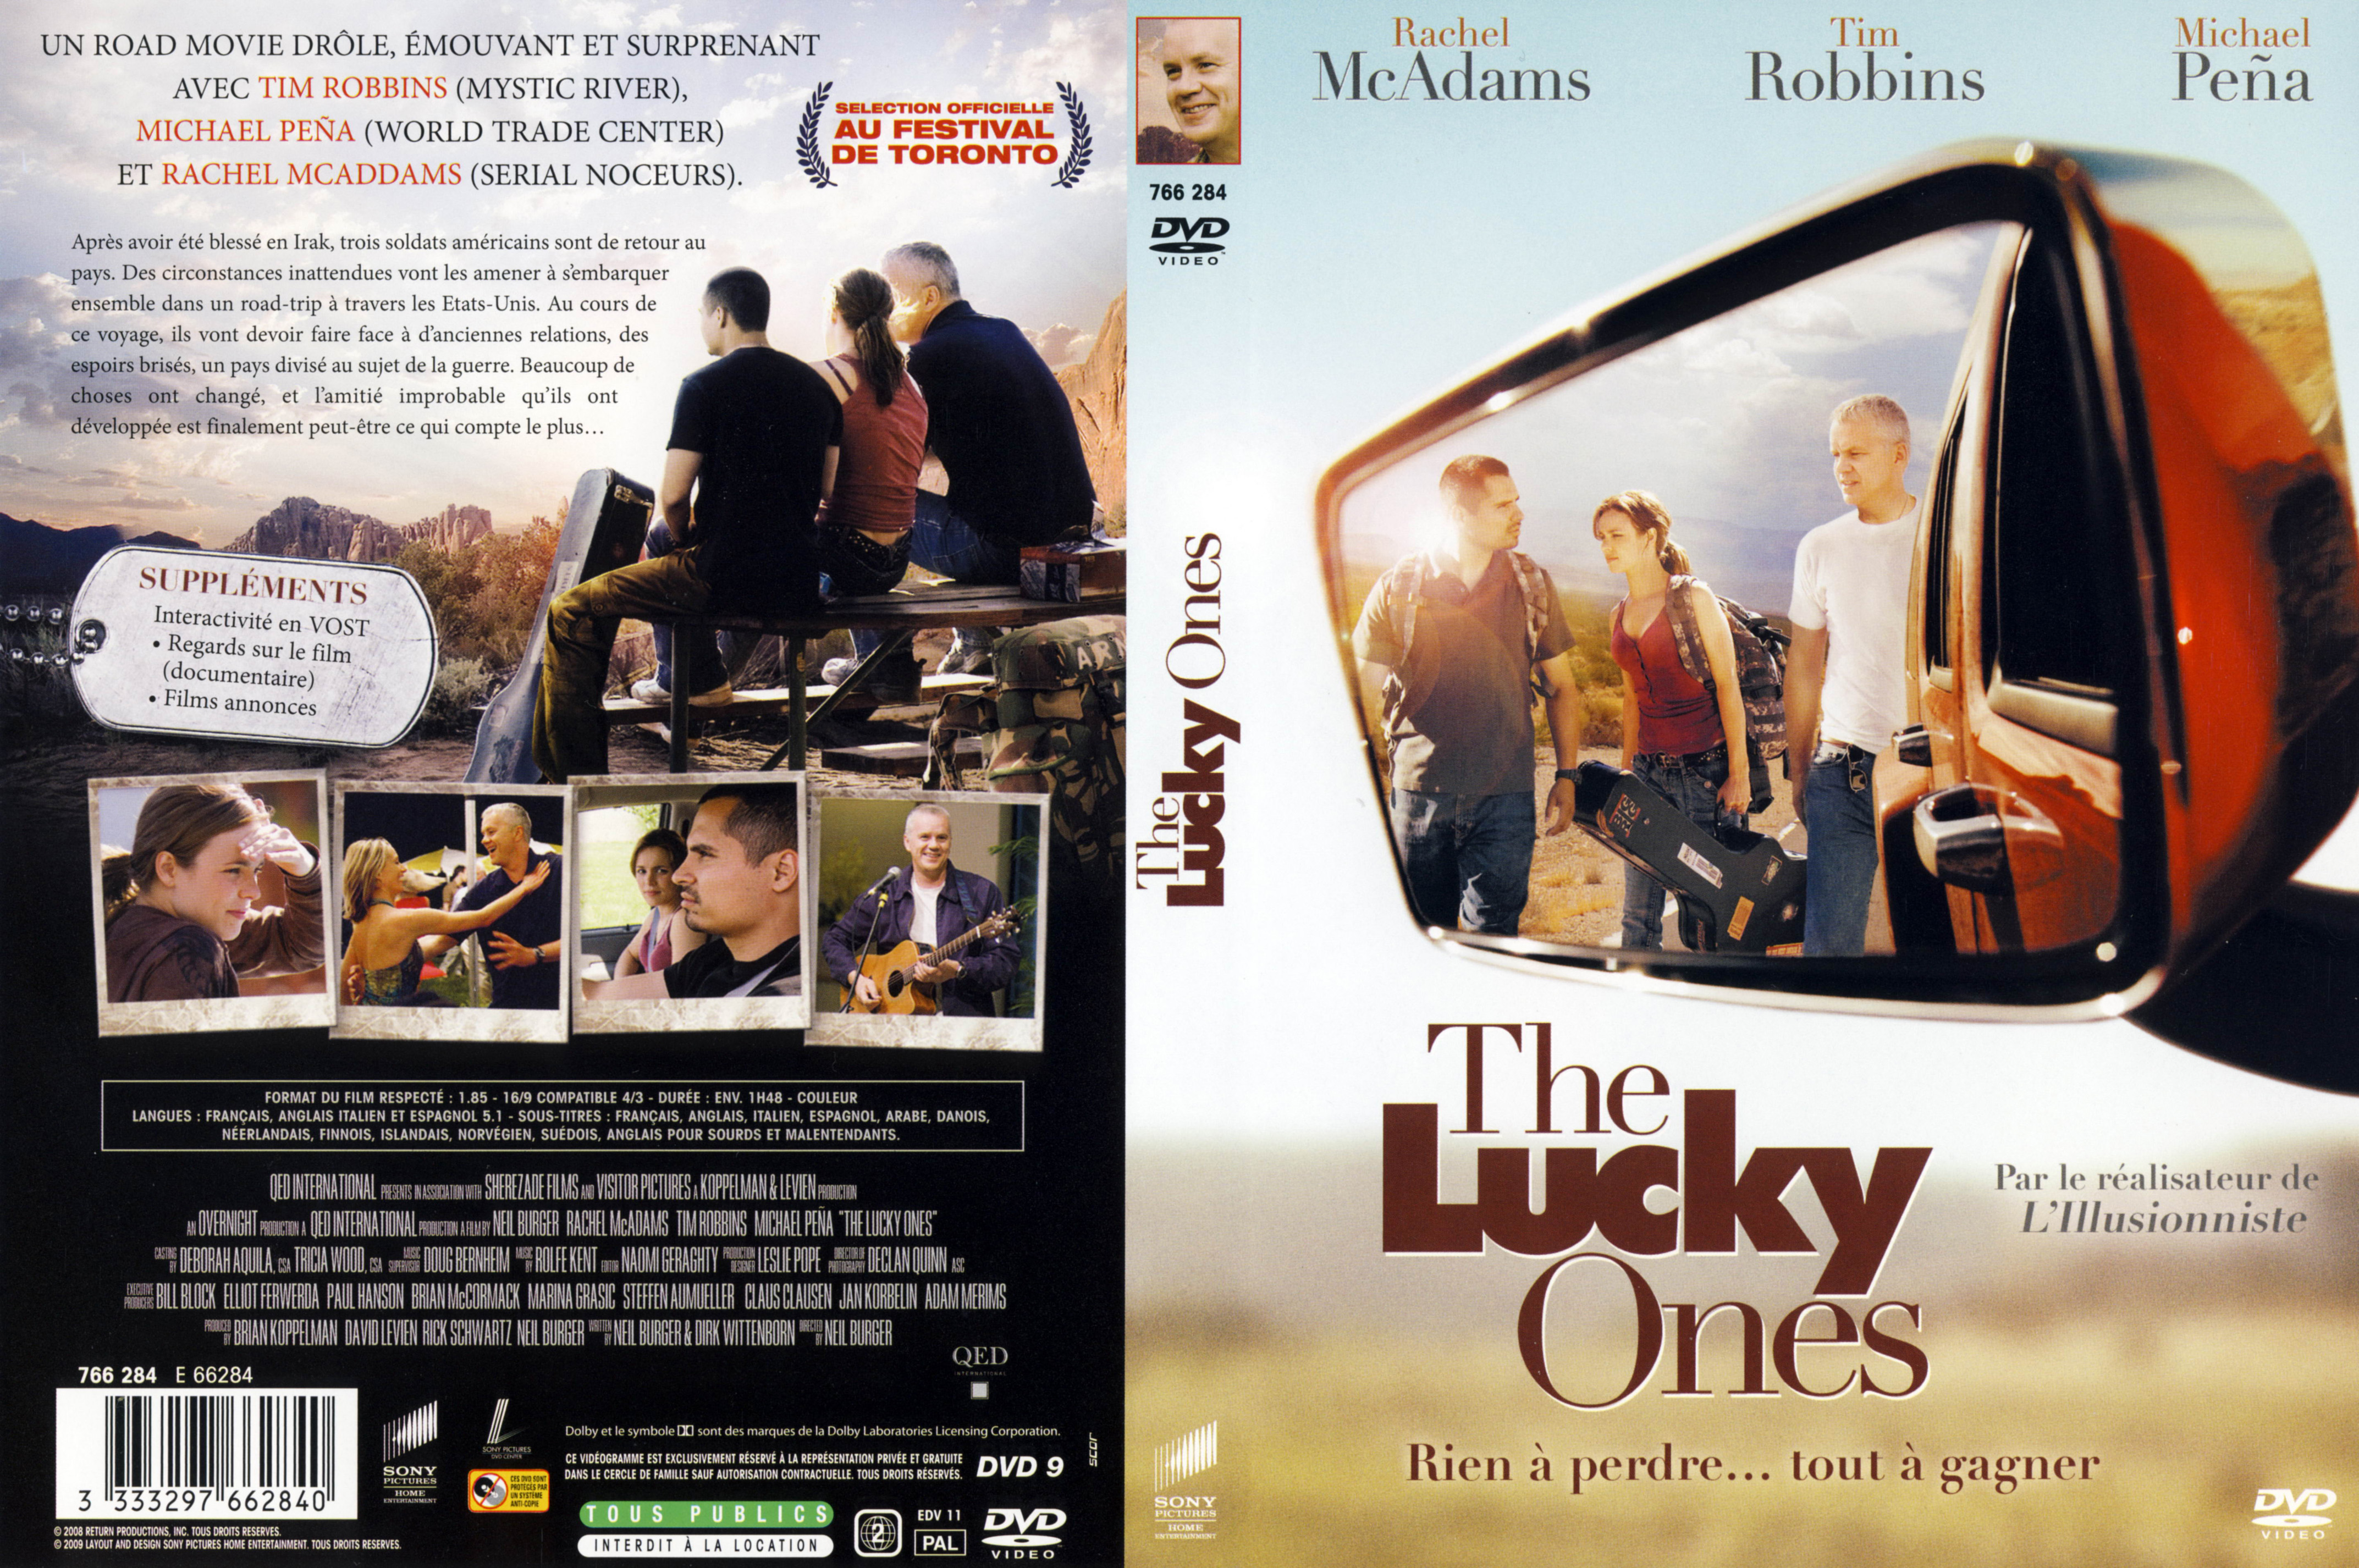 Jaquette DVD The lucky ones